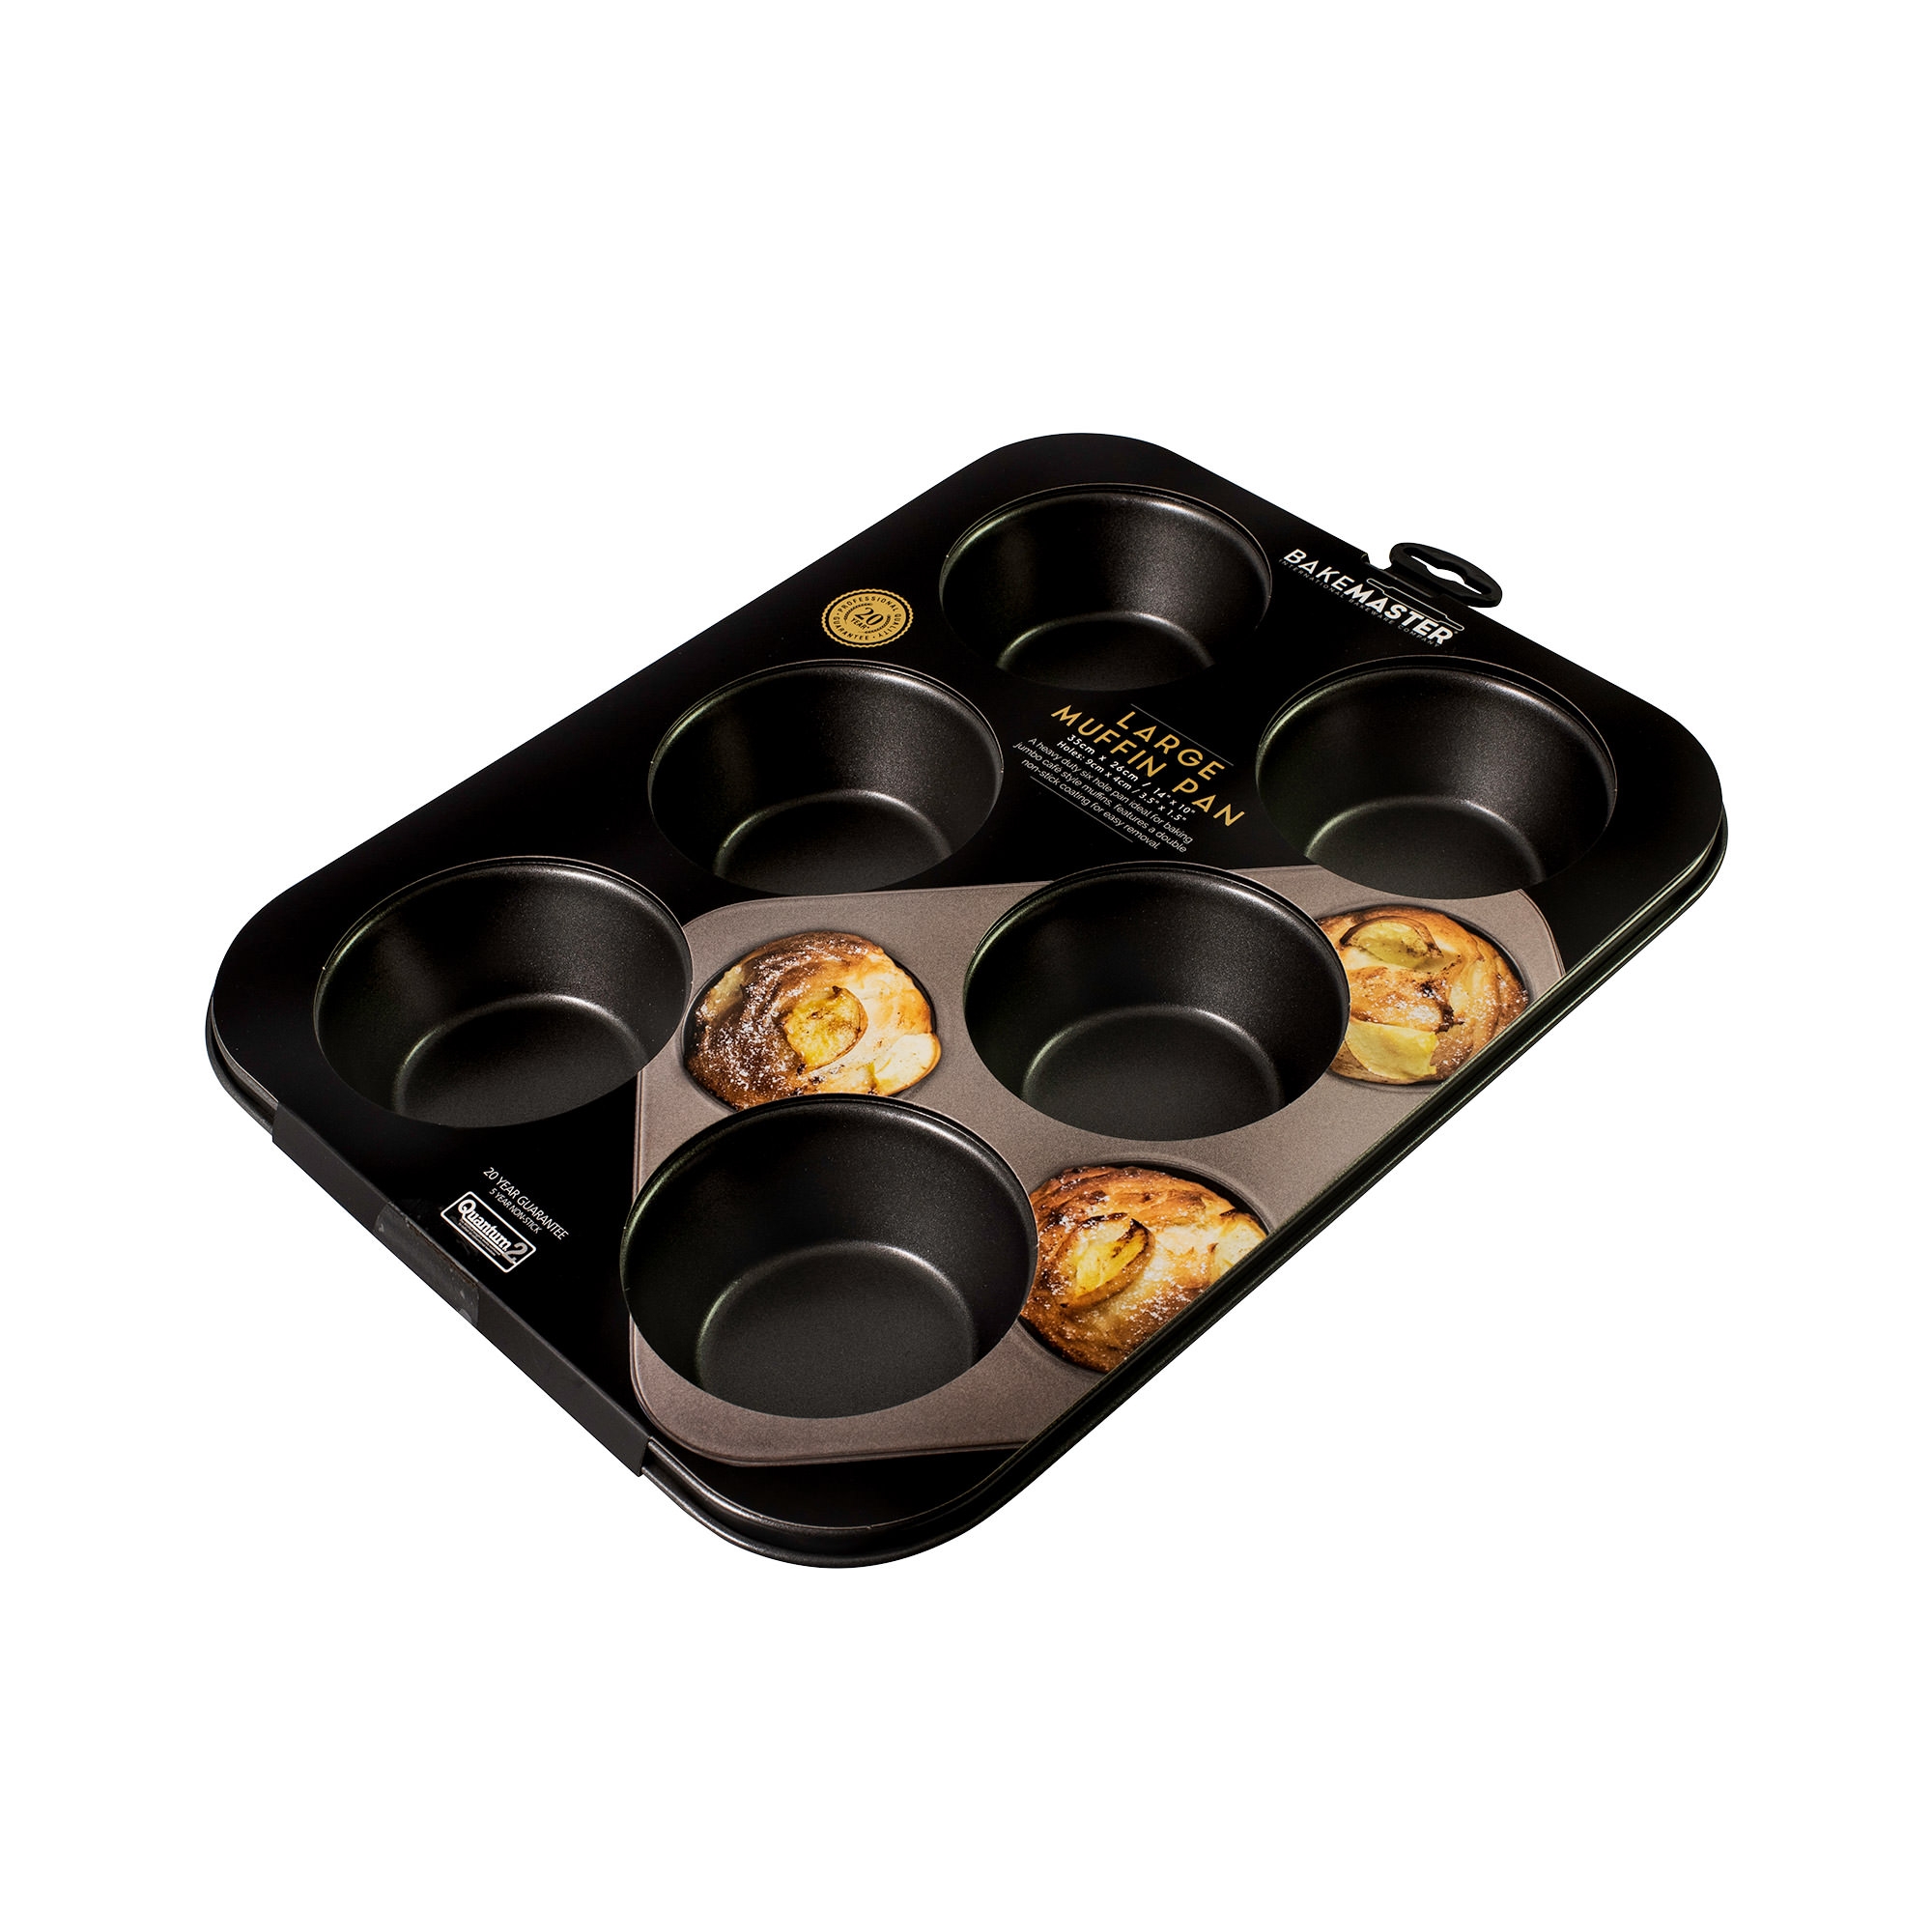 Bakemaster Non Stick Large Muffin Pan 6 Cup Image 2